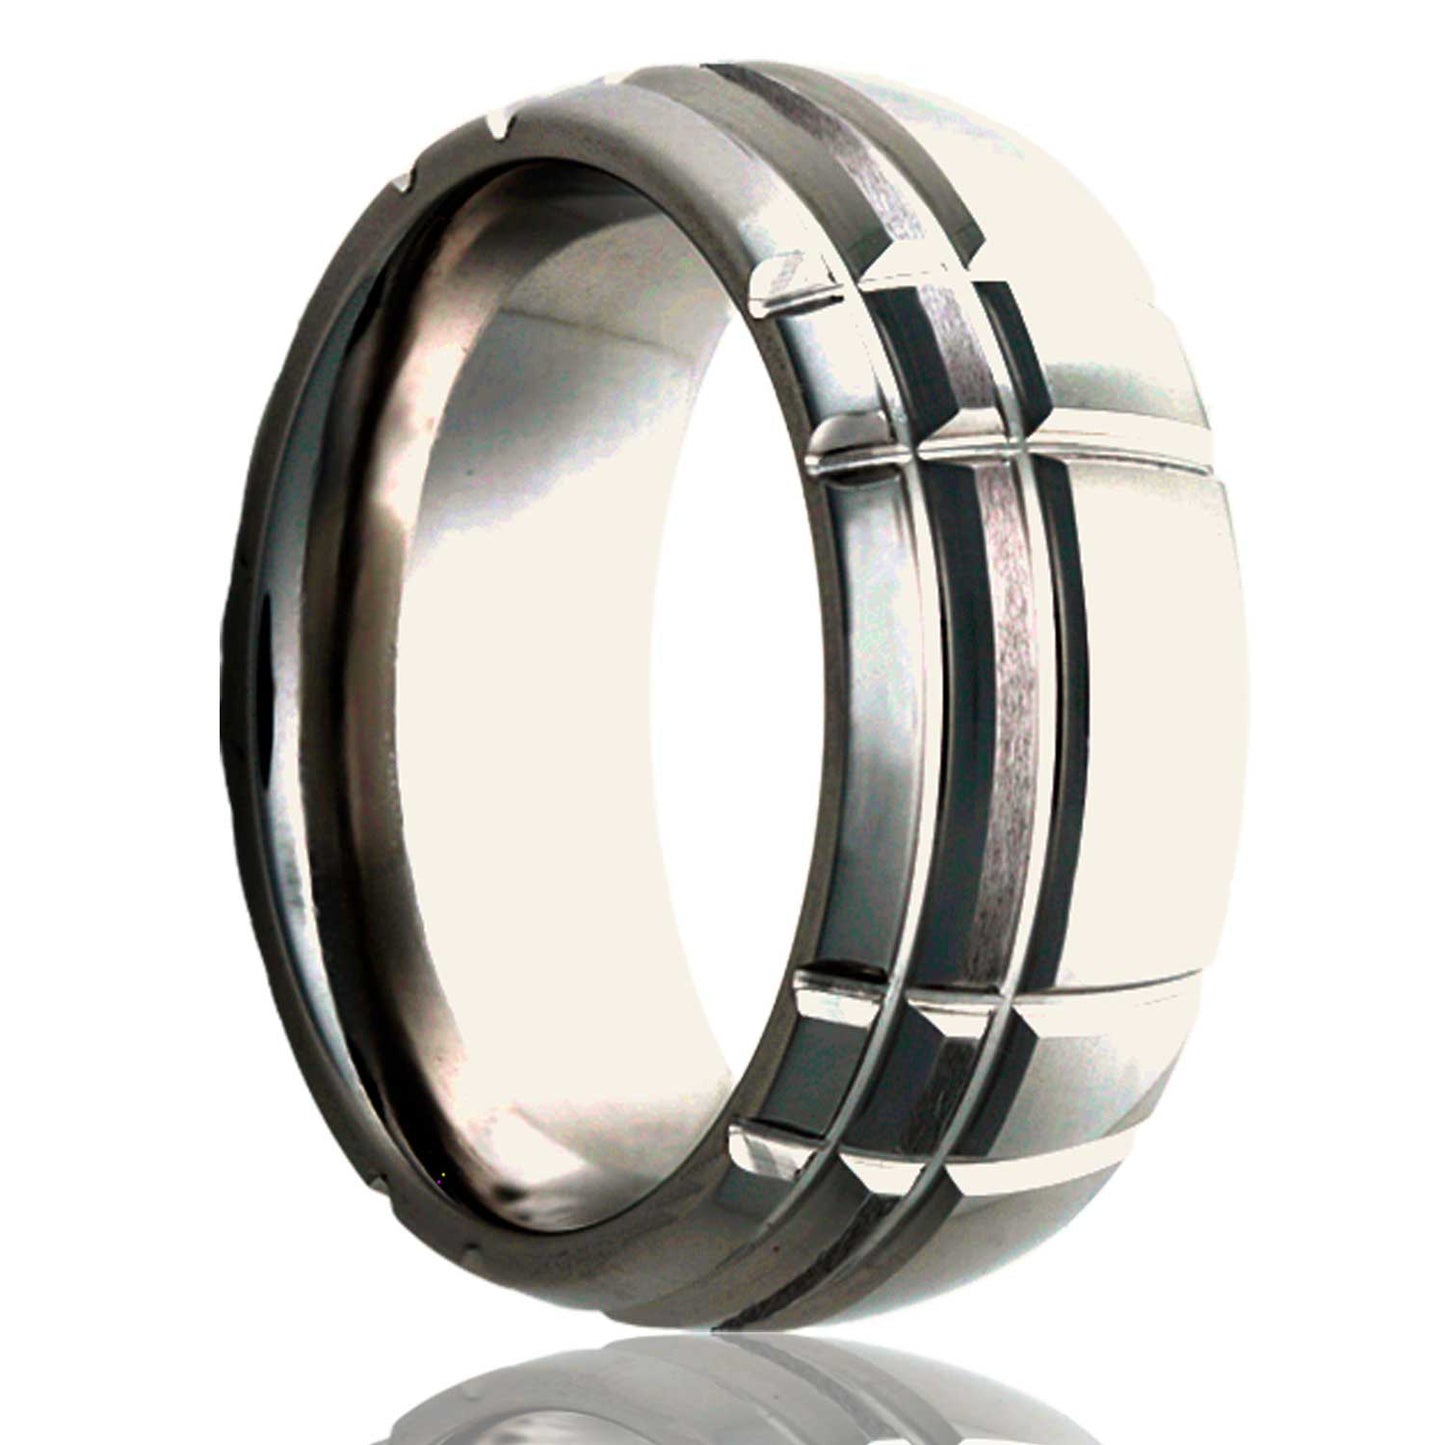 A asymmetrical intersecting grooves domed satin finish titanium wedding band displayed on a neutral white background.